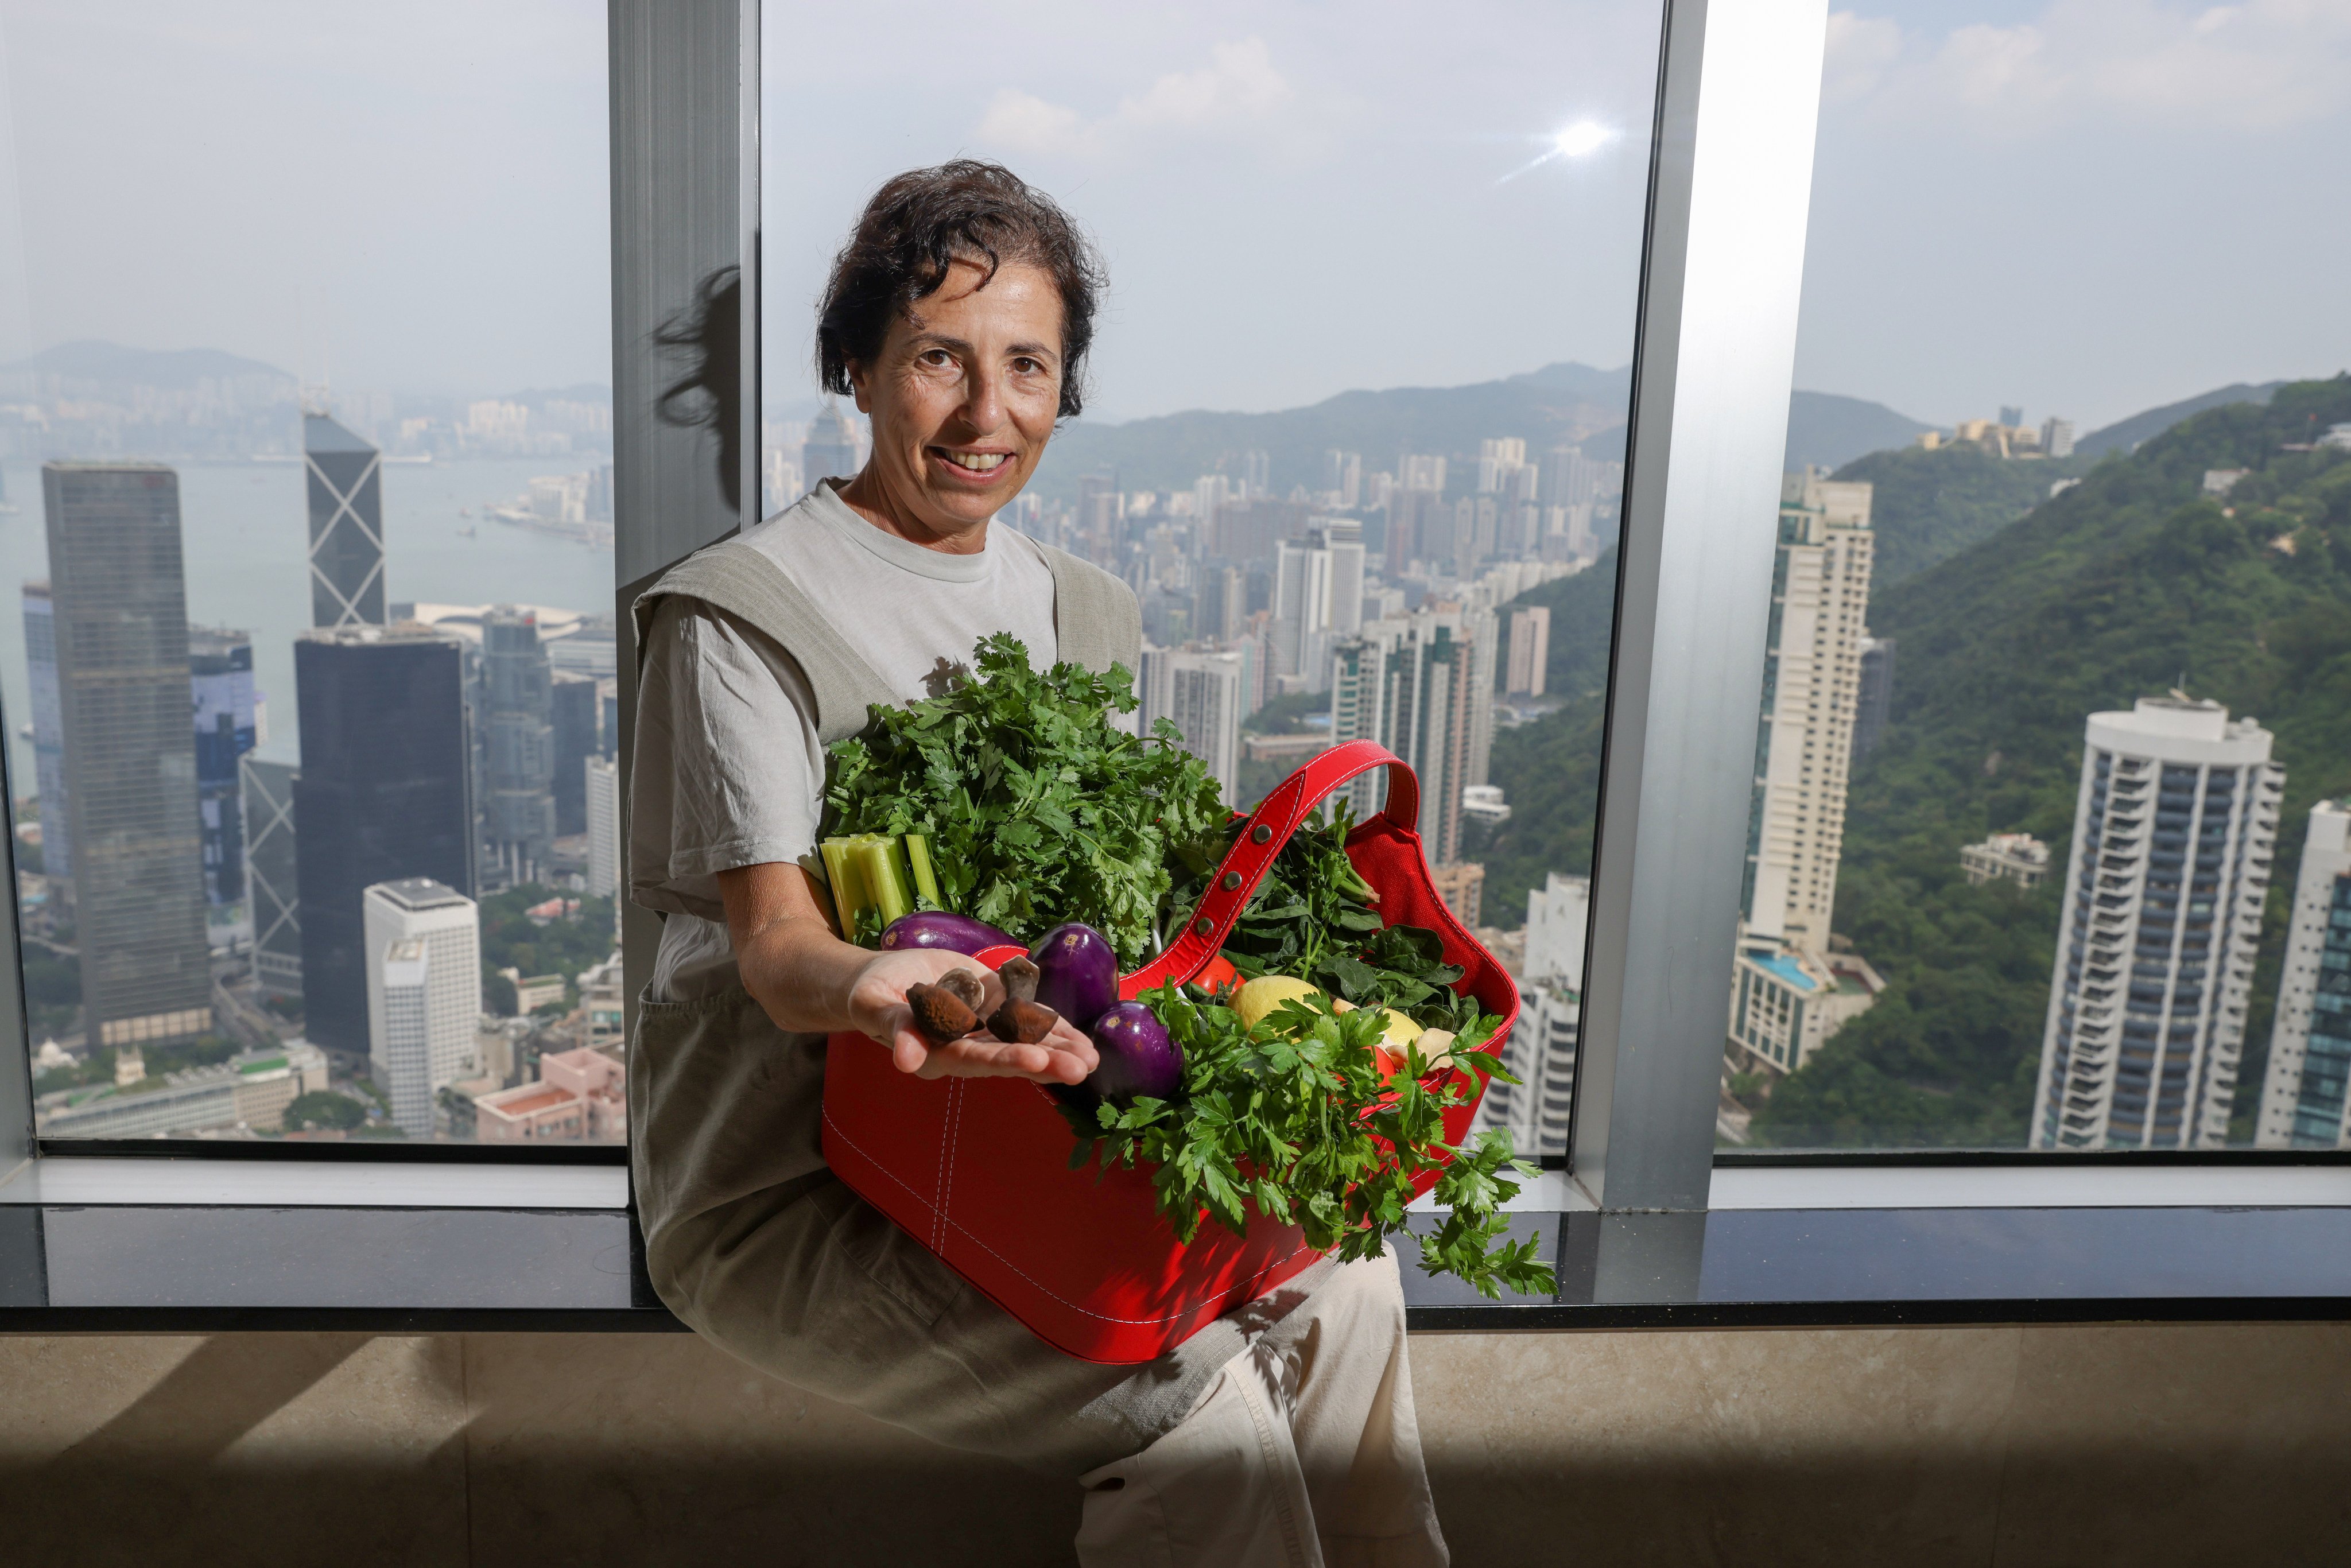 Israeli chef Avital Sebbag in Hong Kong, where she will cook food for Buddhist monks inspired by her own Zen Buddhist practice and traditional Chinese medicine. Ahead of the event, she shares healthy eating tips and a vegan recipe. Photo: Yik Yeung-man